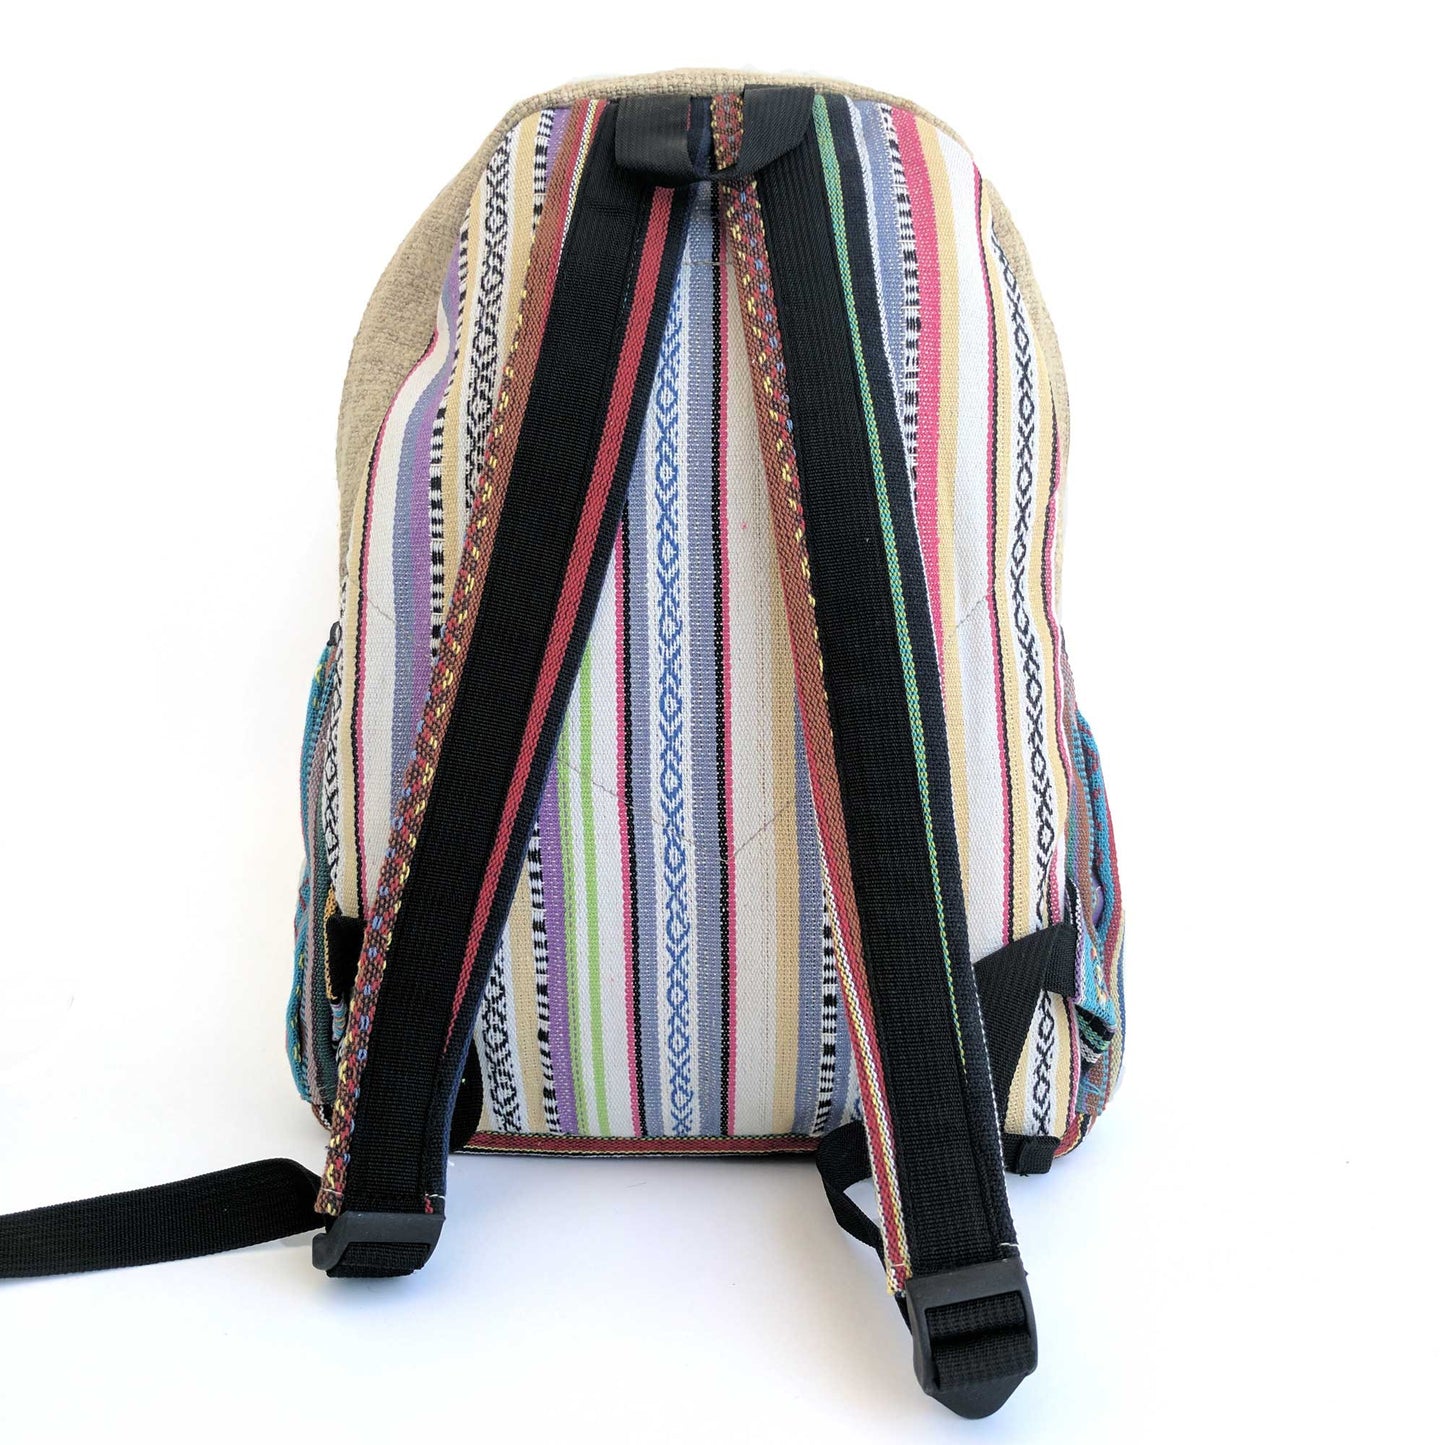 Backpack made from 100% pure hand-woven HEMP rear view